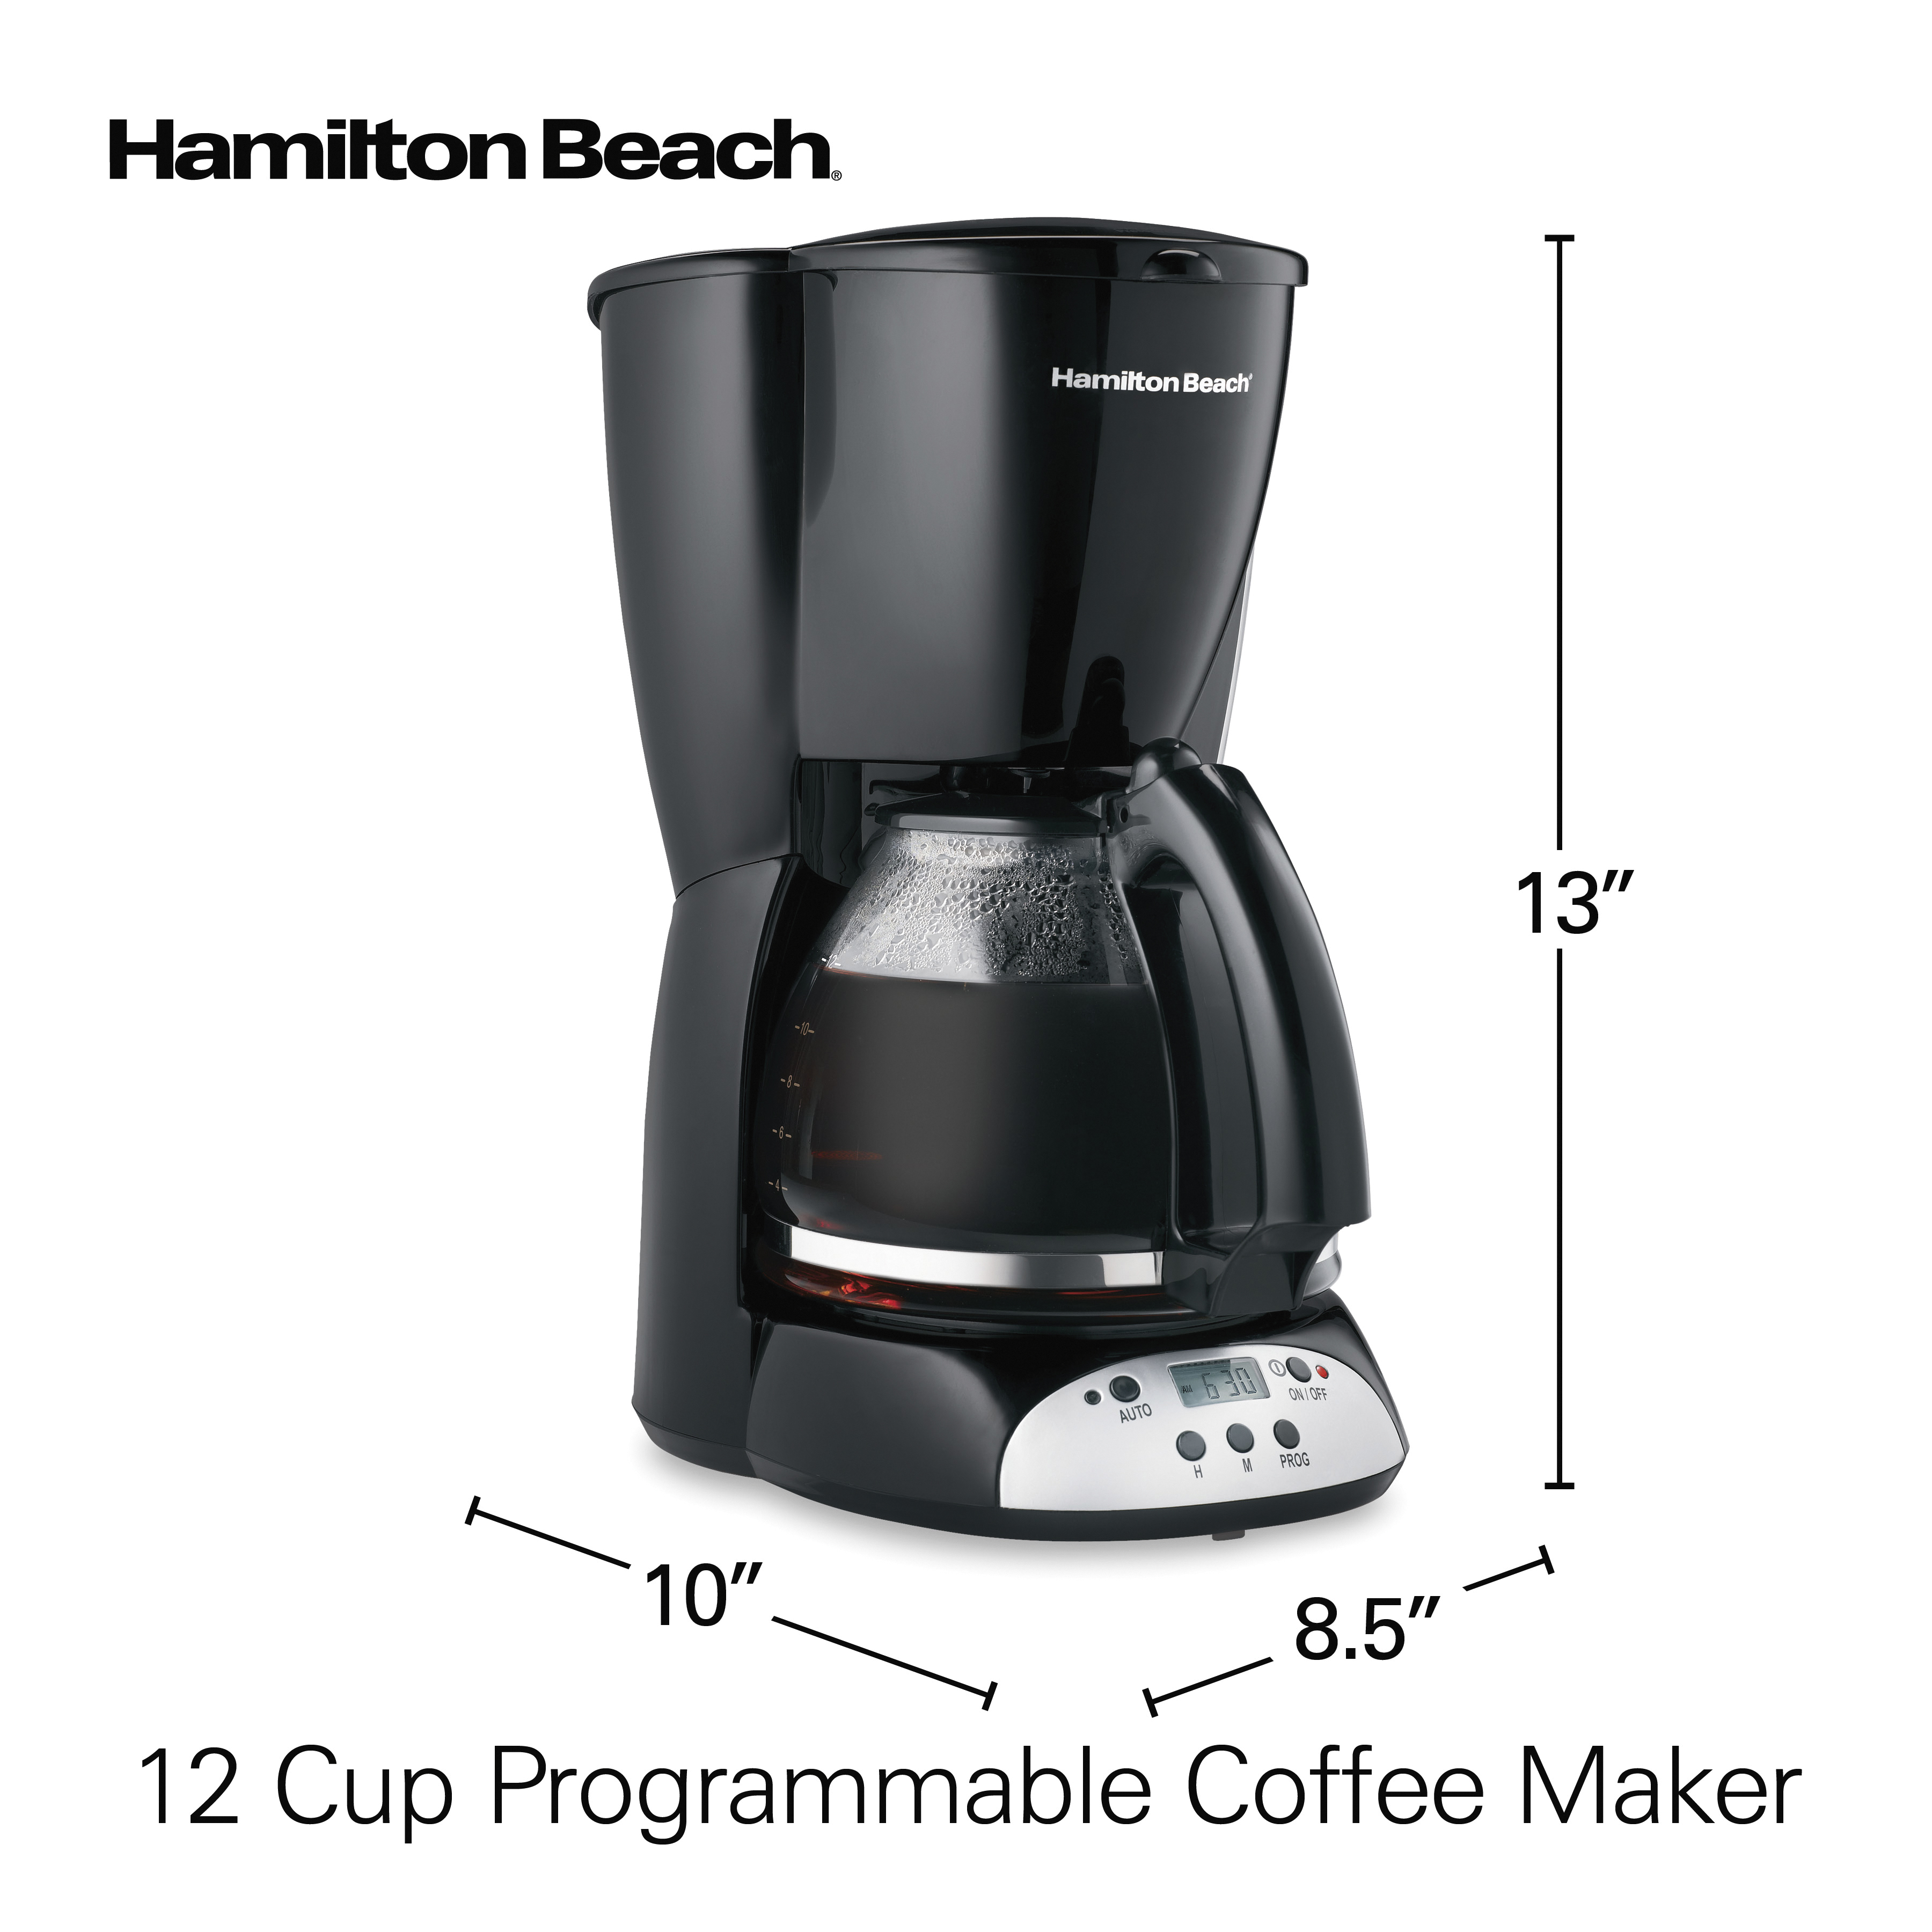 Hamilton Beach 12 Cup Programmable Coffee Maker, Glass Carafe, Black and Silver, 49465R - image 8 of 8